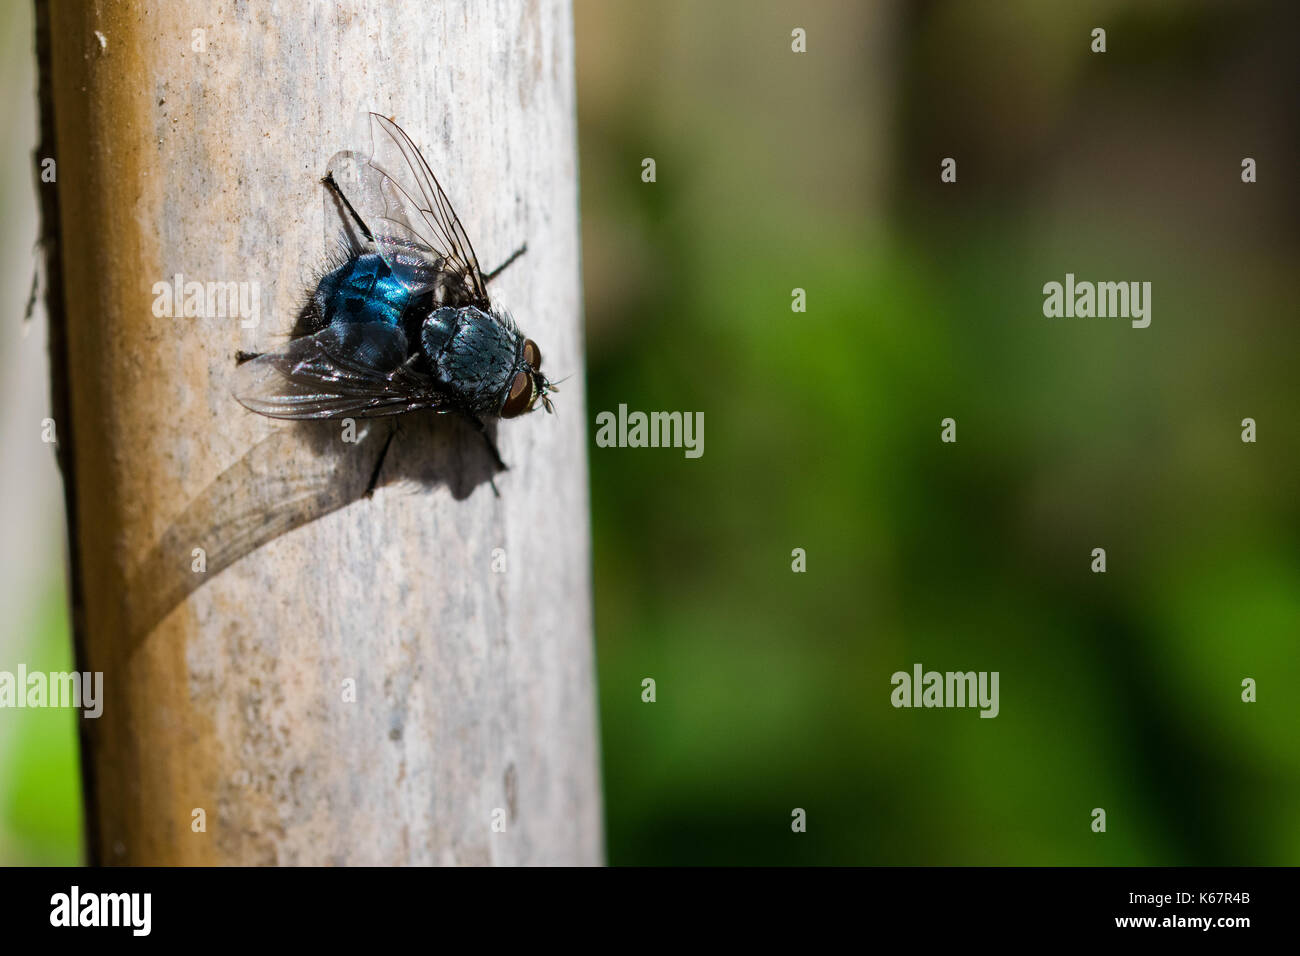 A blue bottle fly, or bottlebee, Calliphora vomitoria, resting on a reed before flying again. Found in a valley in the Maltese countryside, Malta. Stock Photo